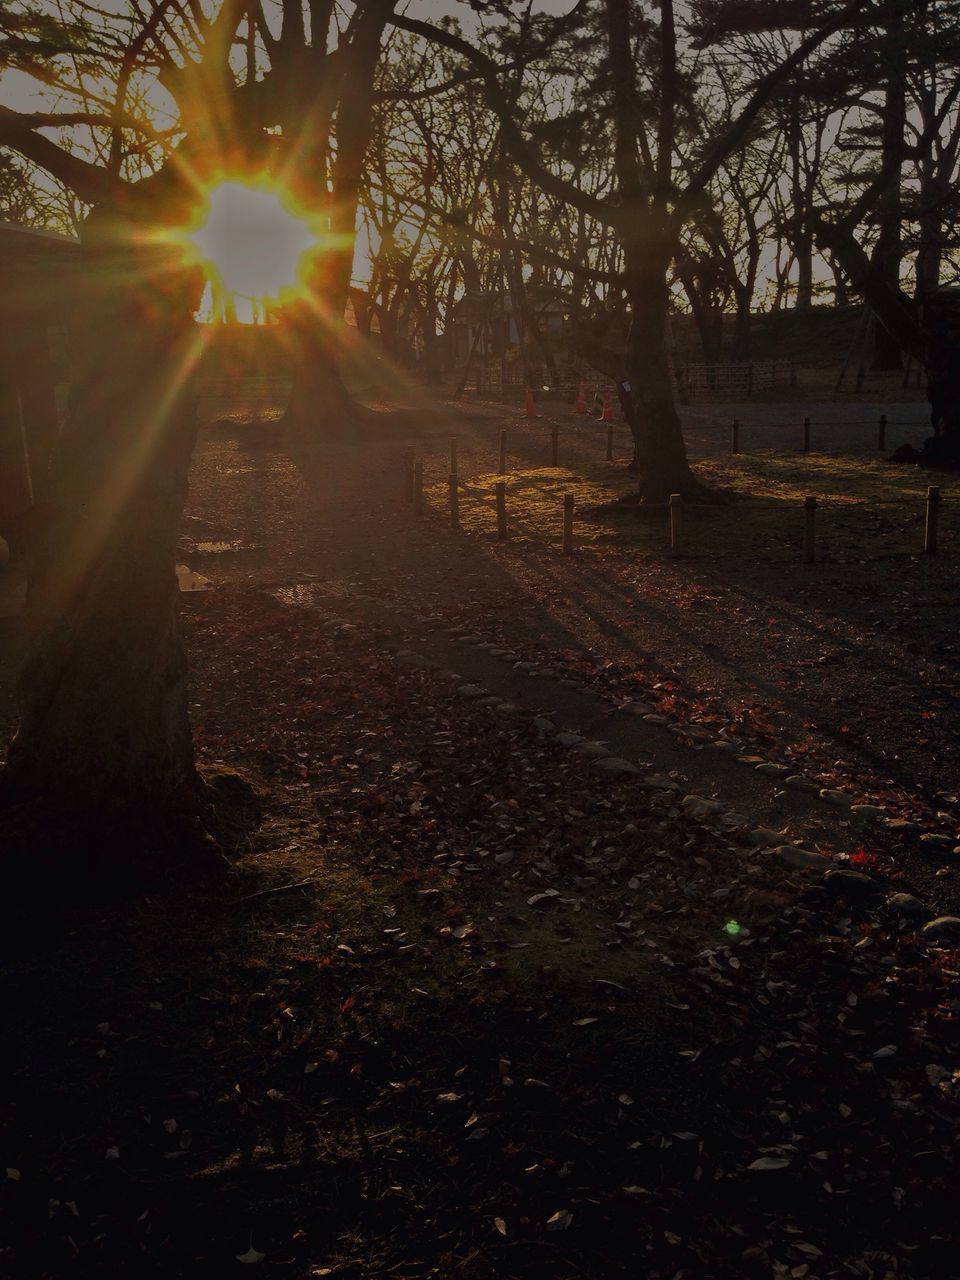 sunbeam, sunlight, tree, nature, beauty in nature, lens flare, sun, tranquility, no people, outdoors, sunset, branch, close-up, day